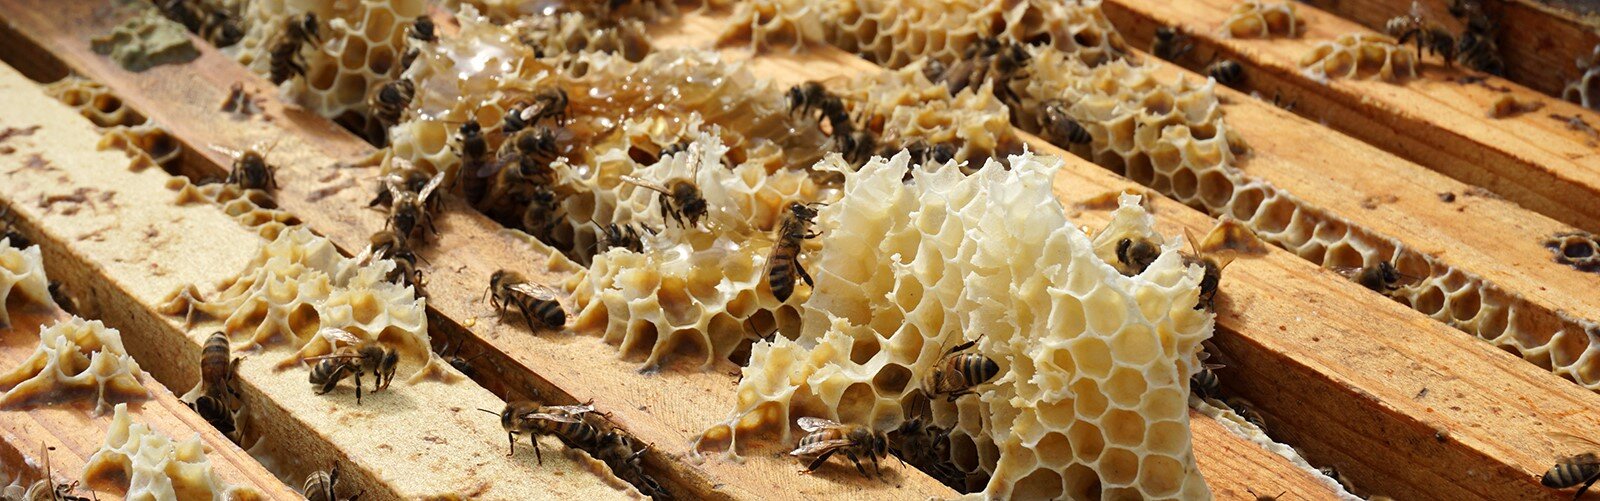 Peek into the honeycomb: A day in the life of a beekeeper